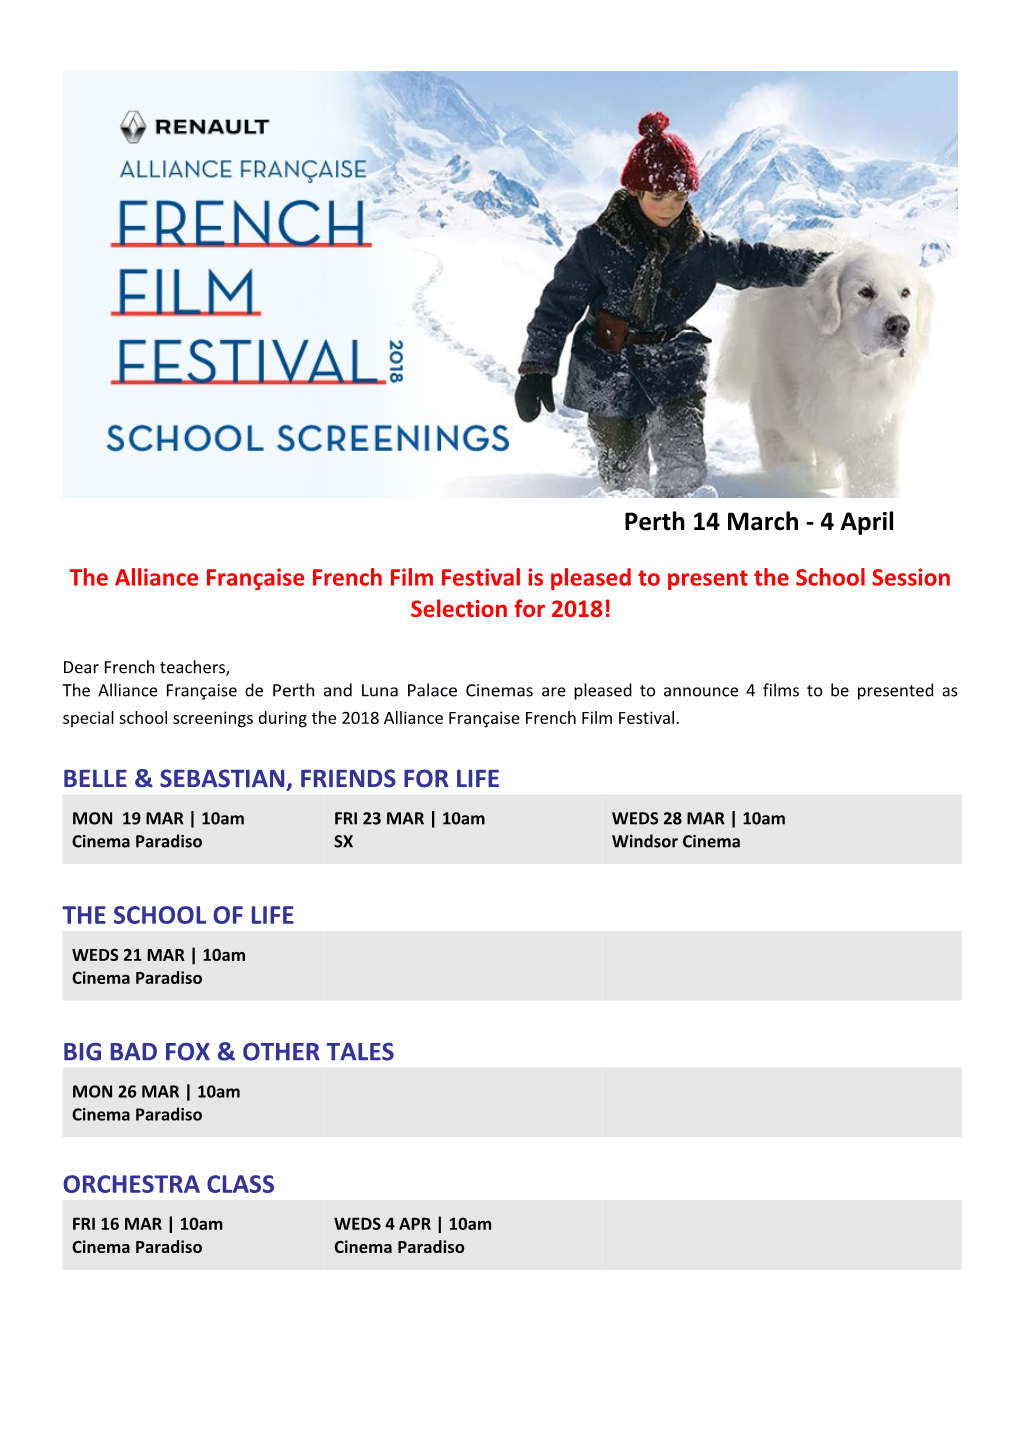 The Alliance Française French Film Festival Is Pleased to Present the School Session Selection